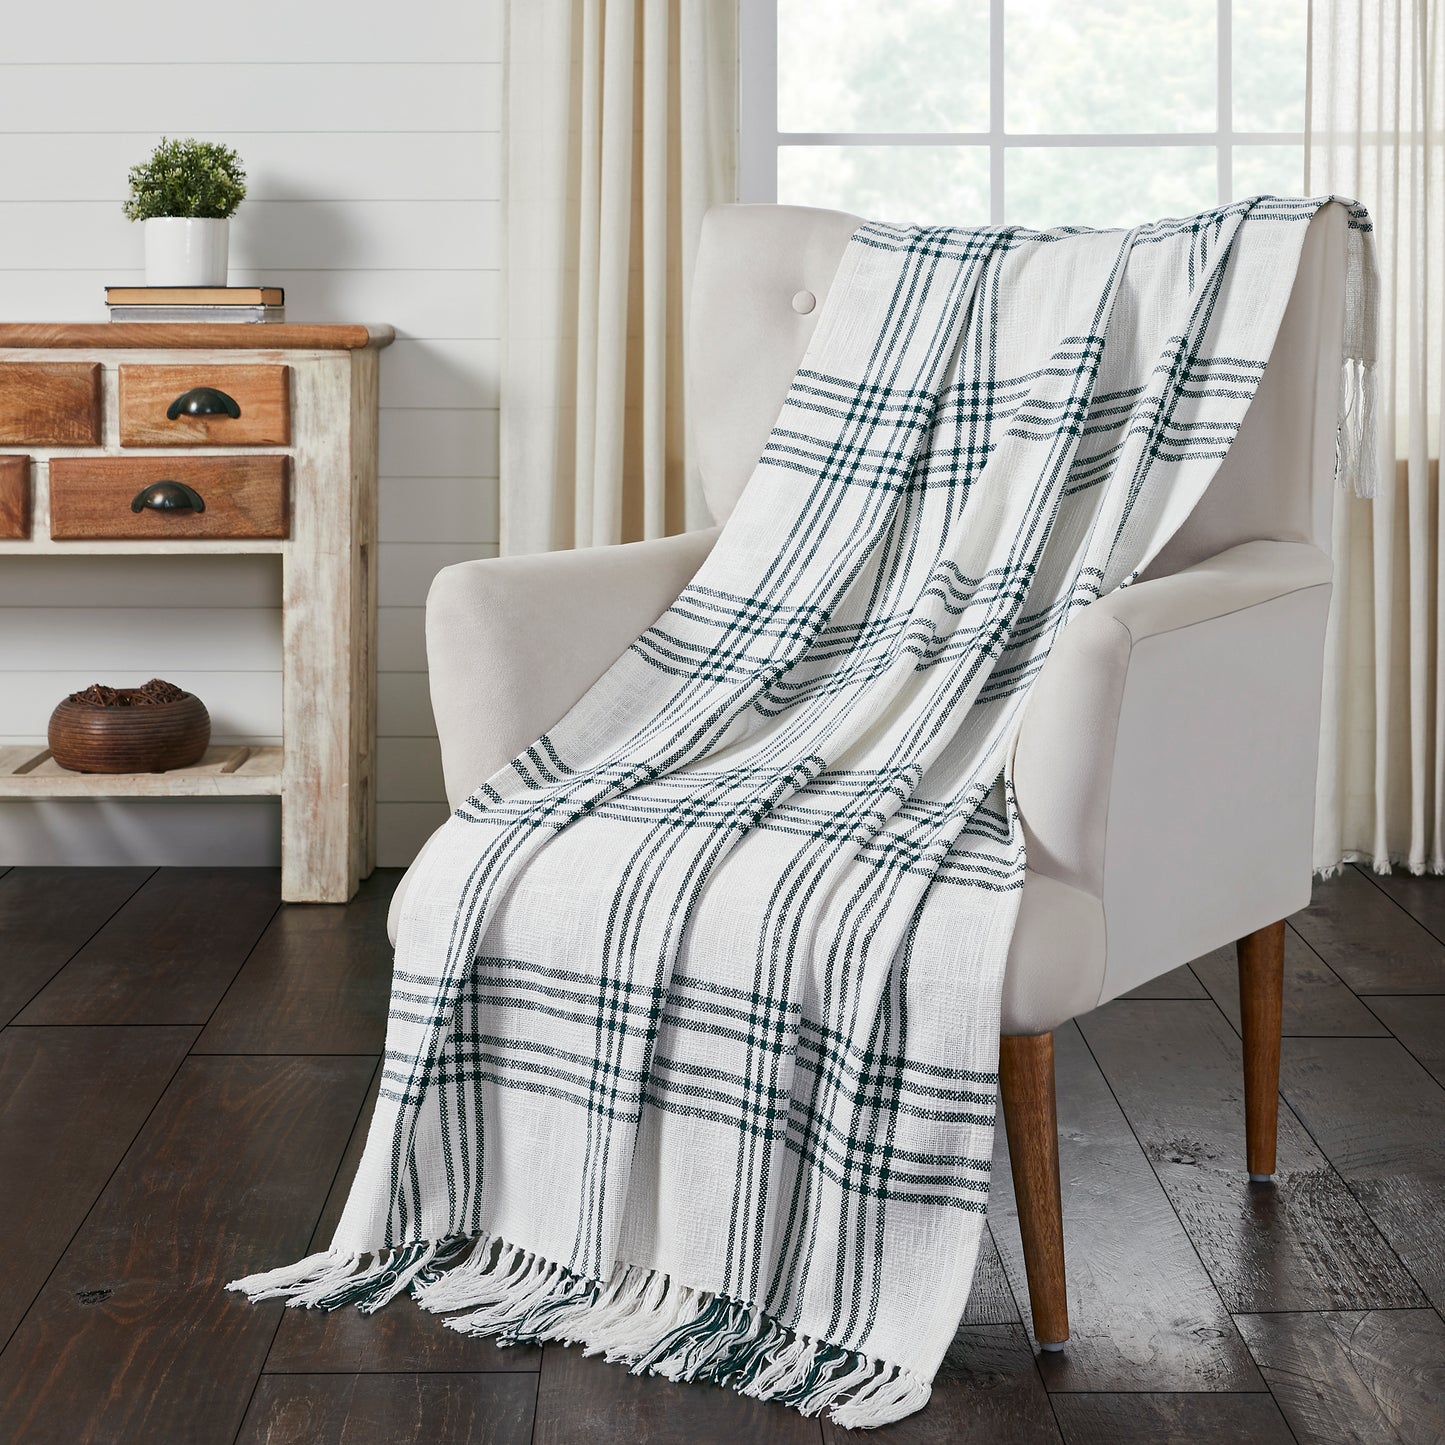 Pine Plaid Woven Blanket on chair